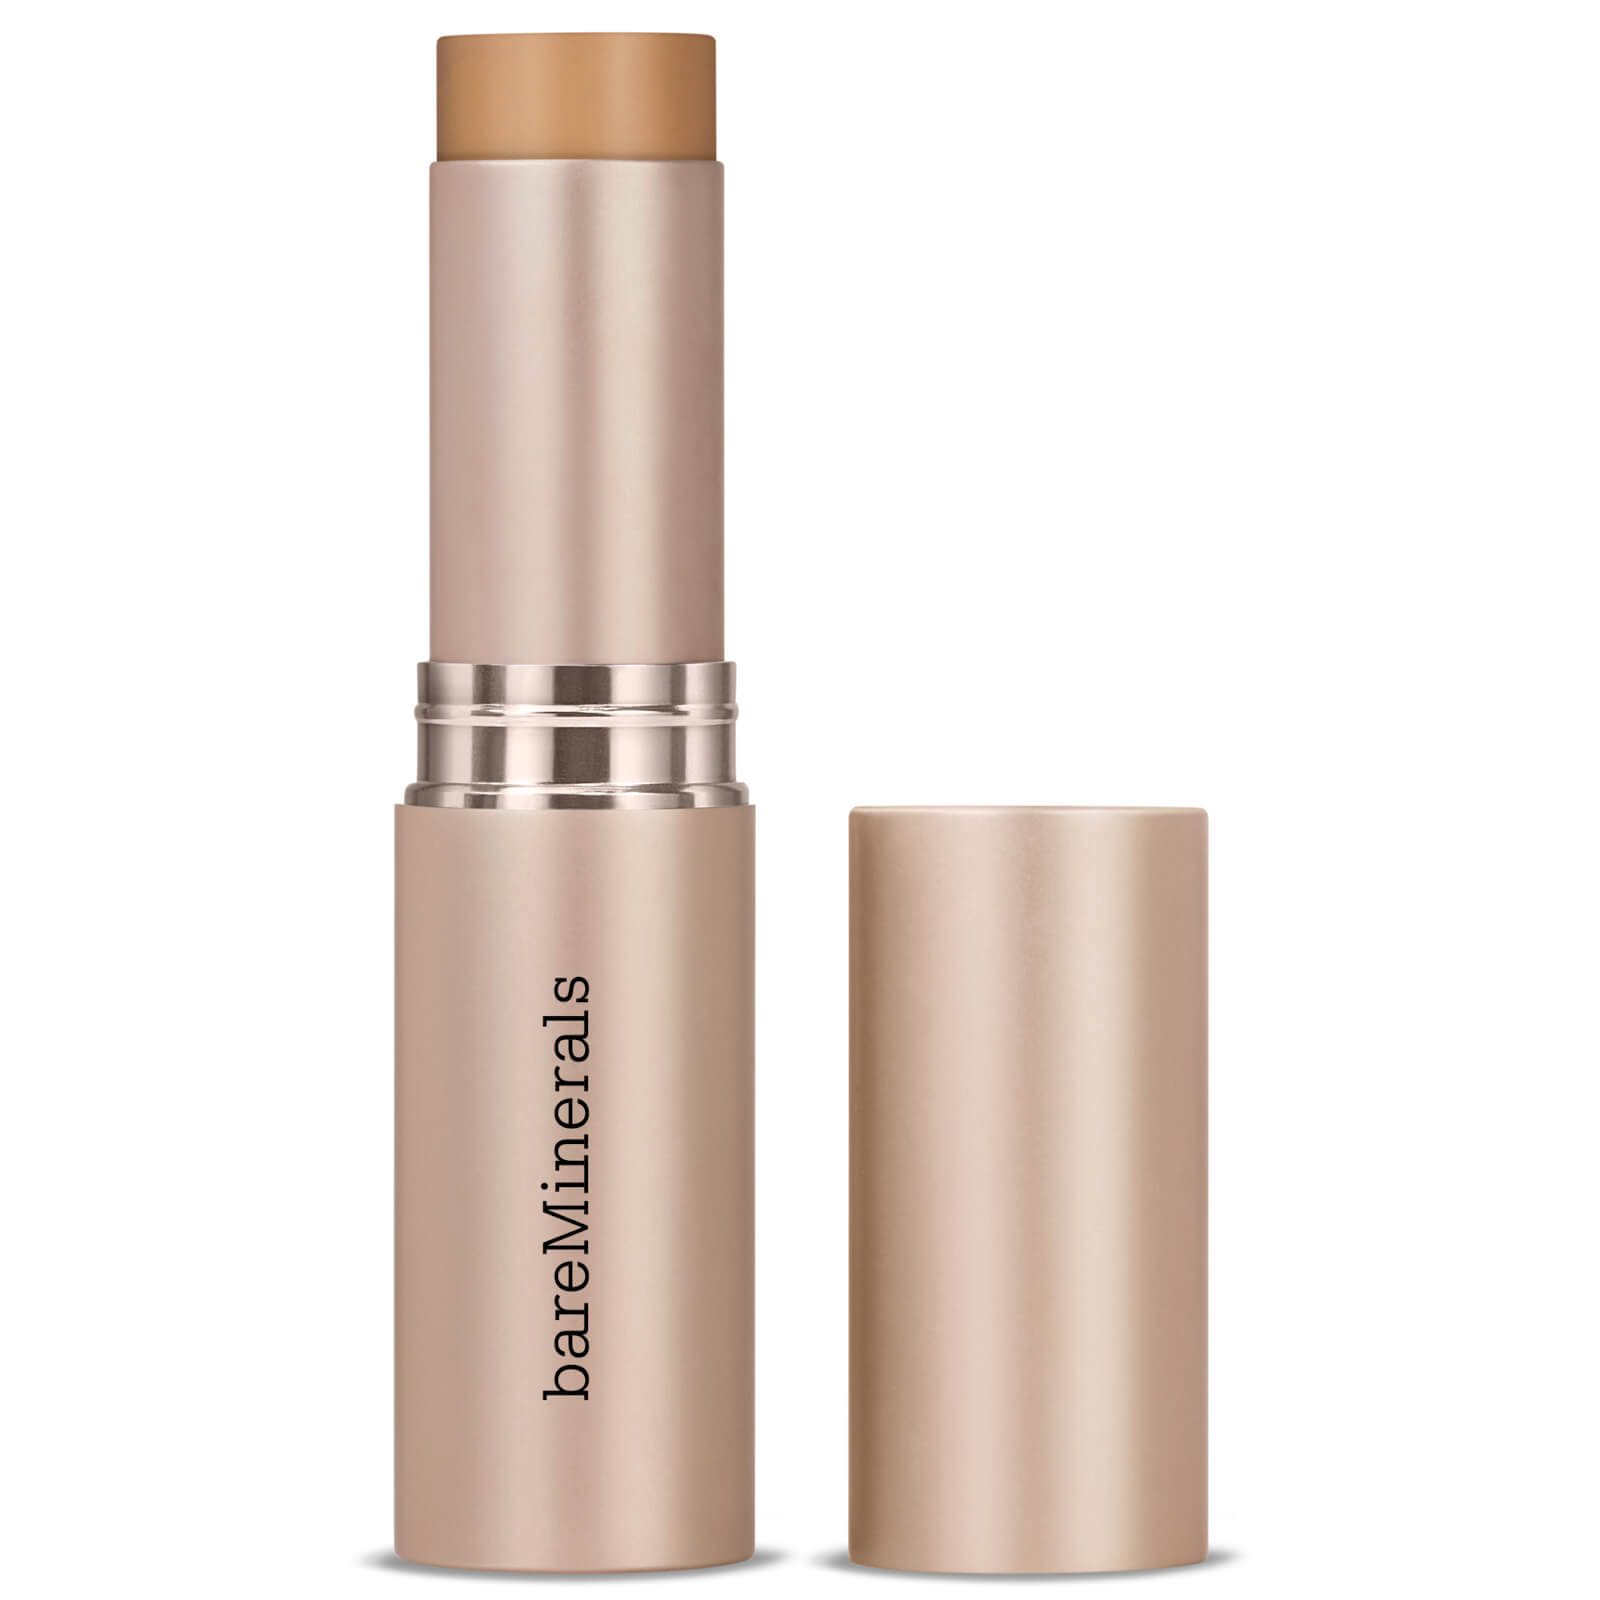 bareMinerals Complexion Rescue Hydrating SPF25 Foundation Stick 10g (Various Shades) - Terra 4.5W